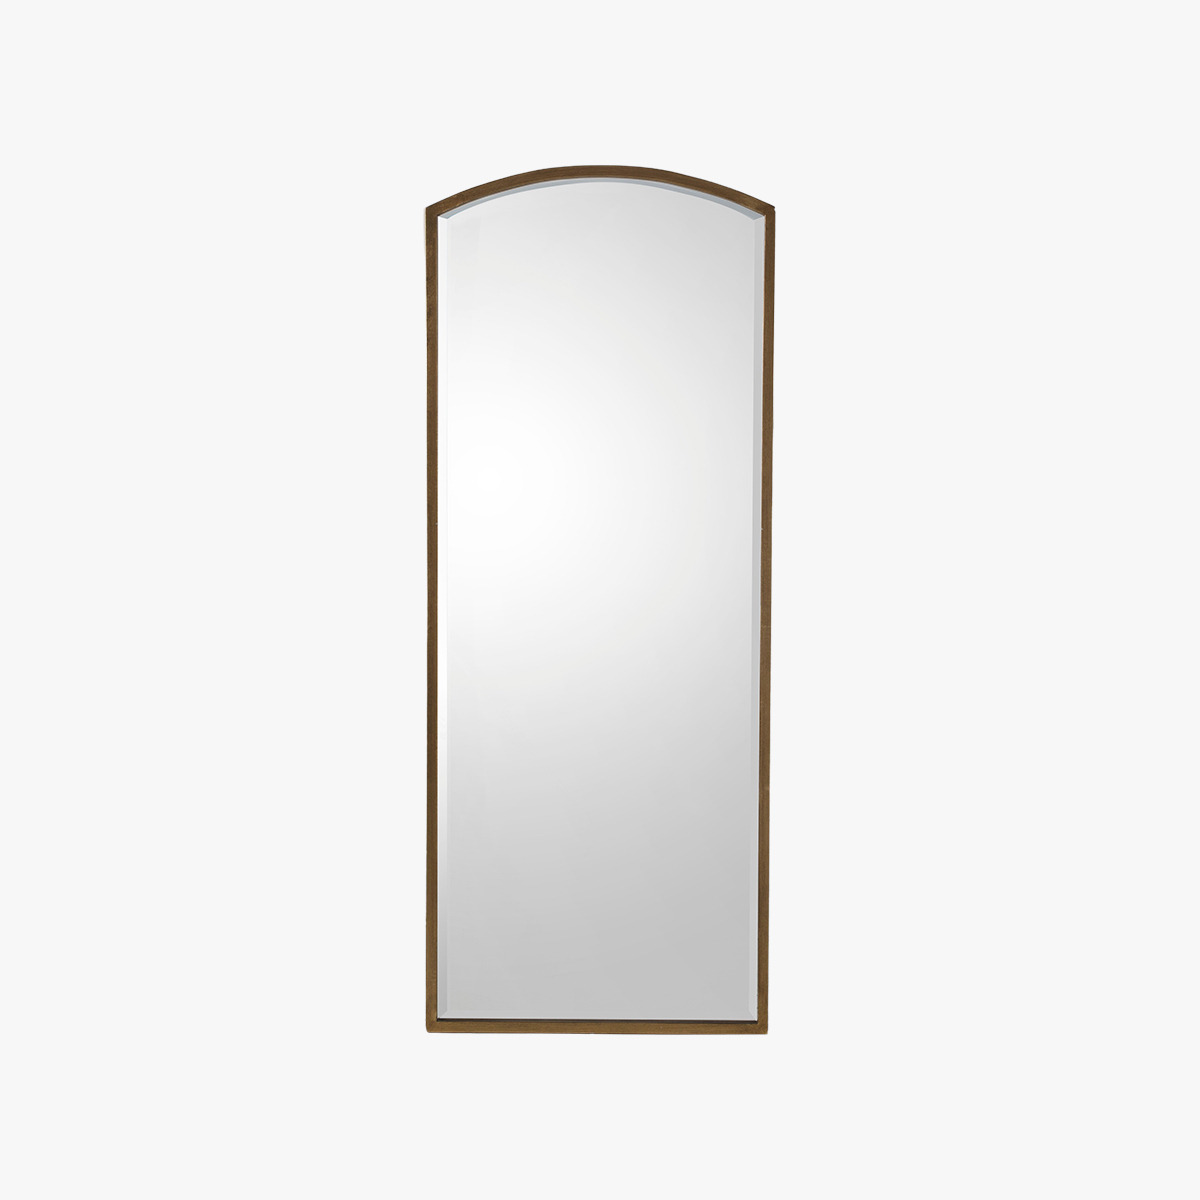 Newport Arch Standing Mirror in Antique Gold